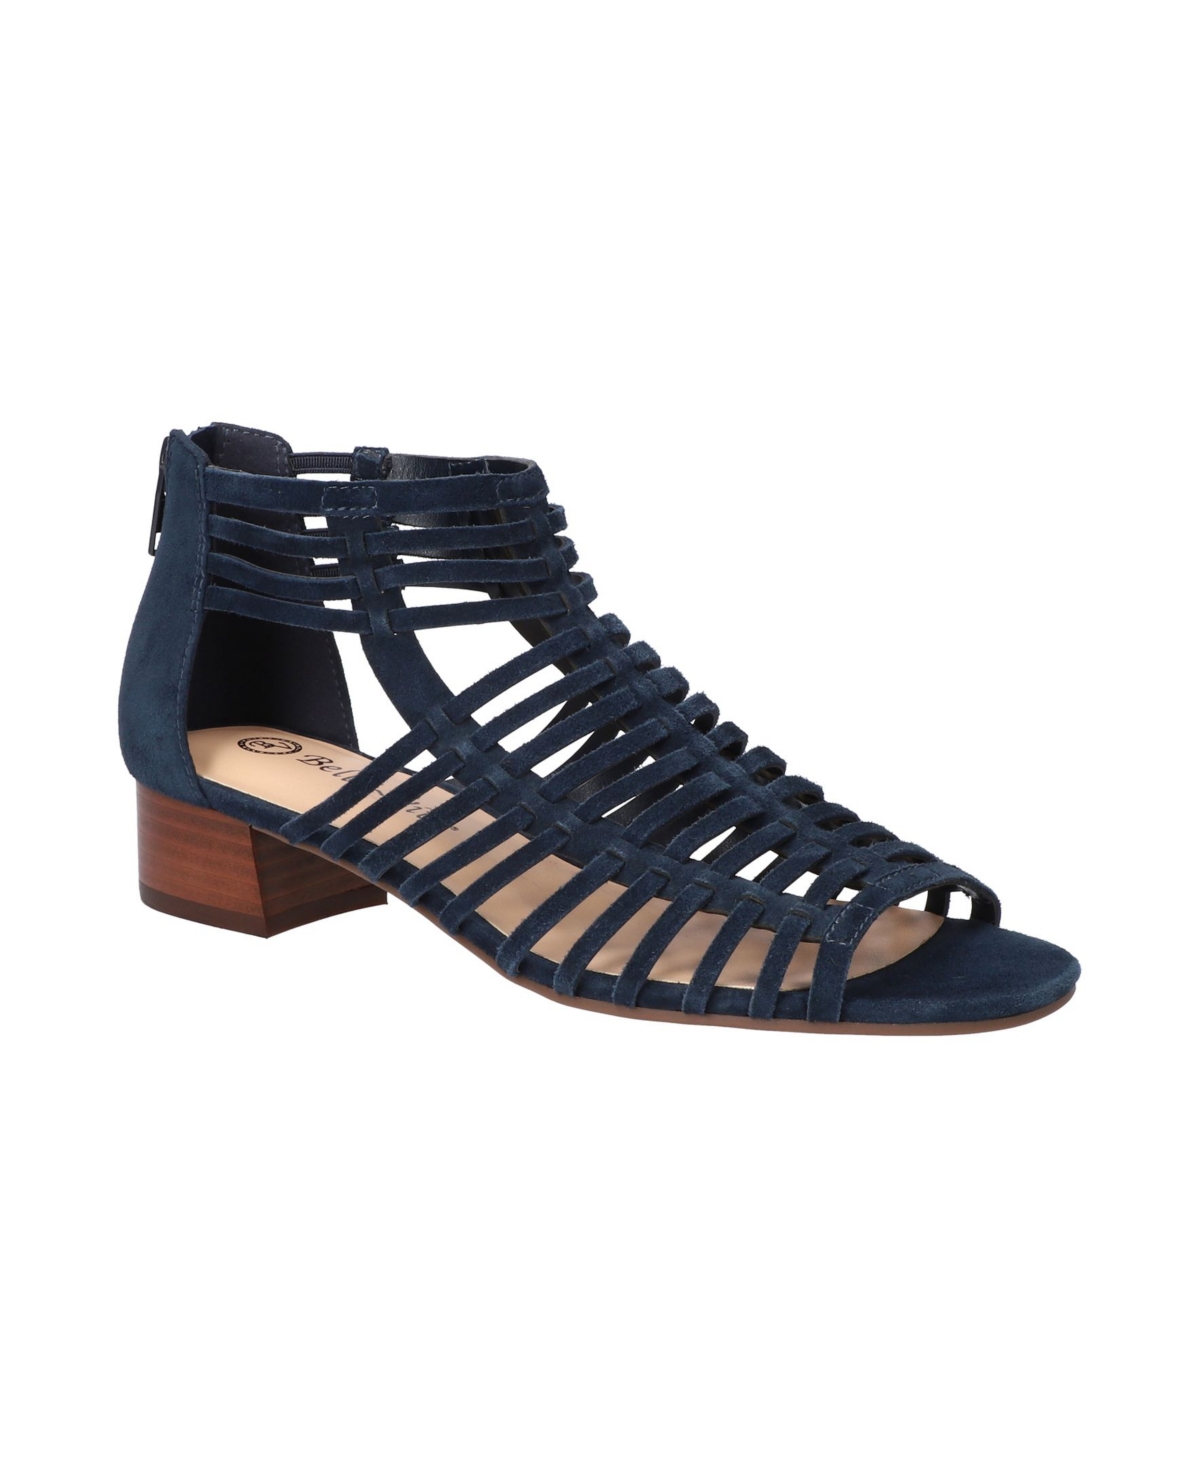 Women's Holden Block Heeled Strappy Sandals - Black Leather